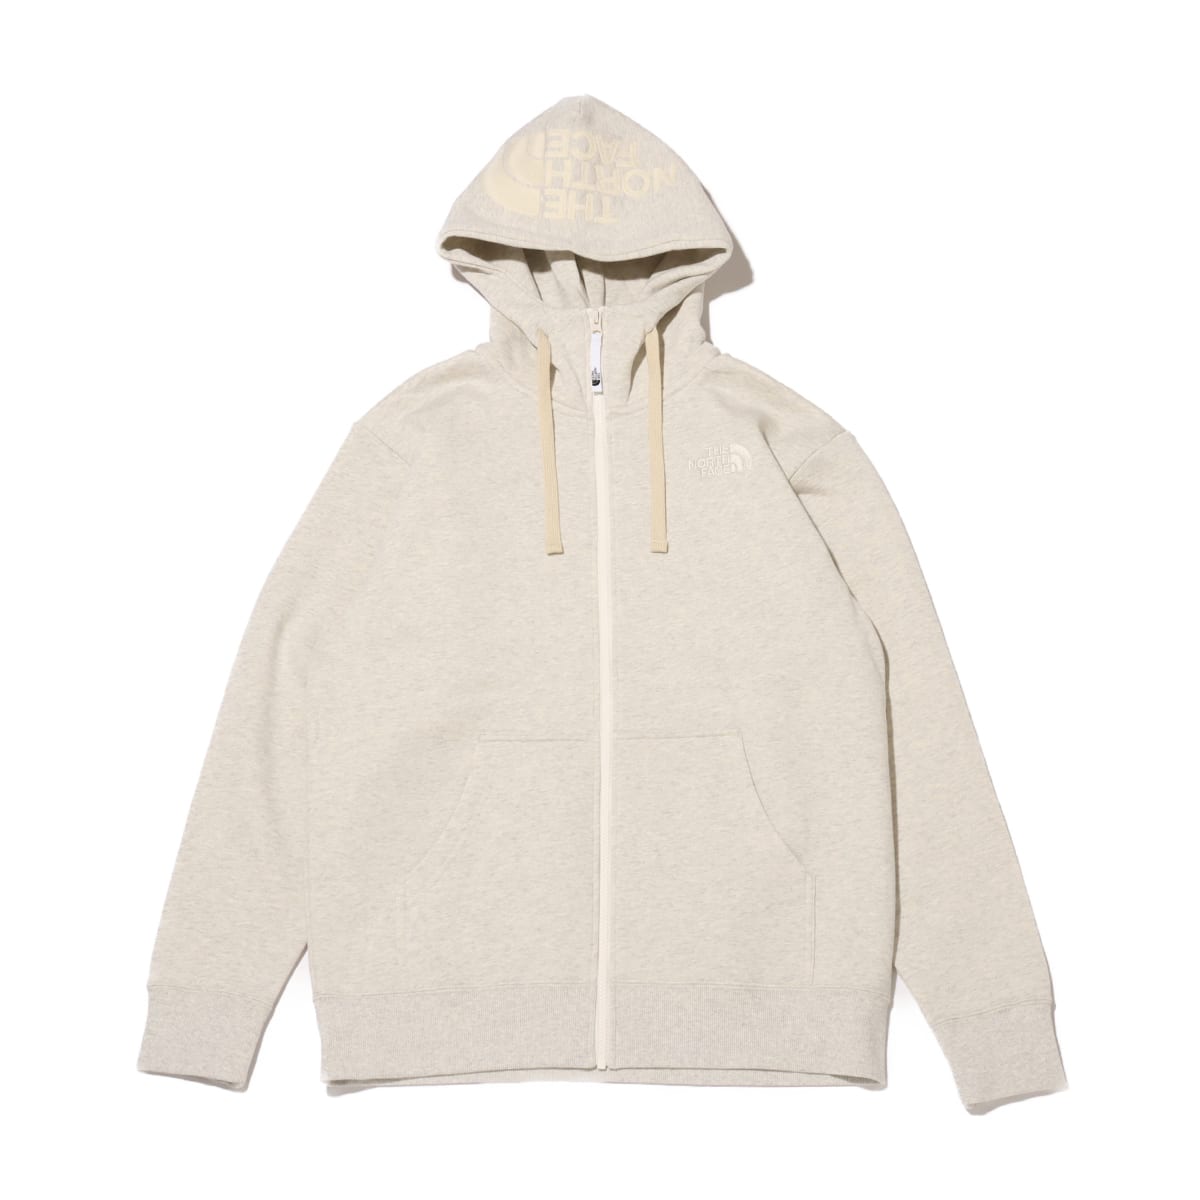 THE NORTH FACE Rearview Full Zip Hoodie オートミール 24SS-I